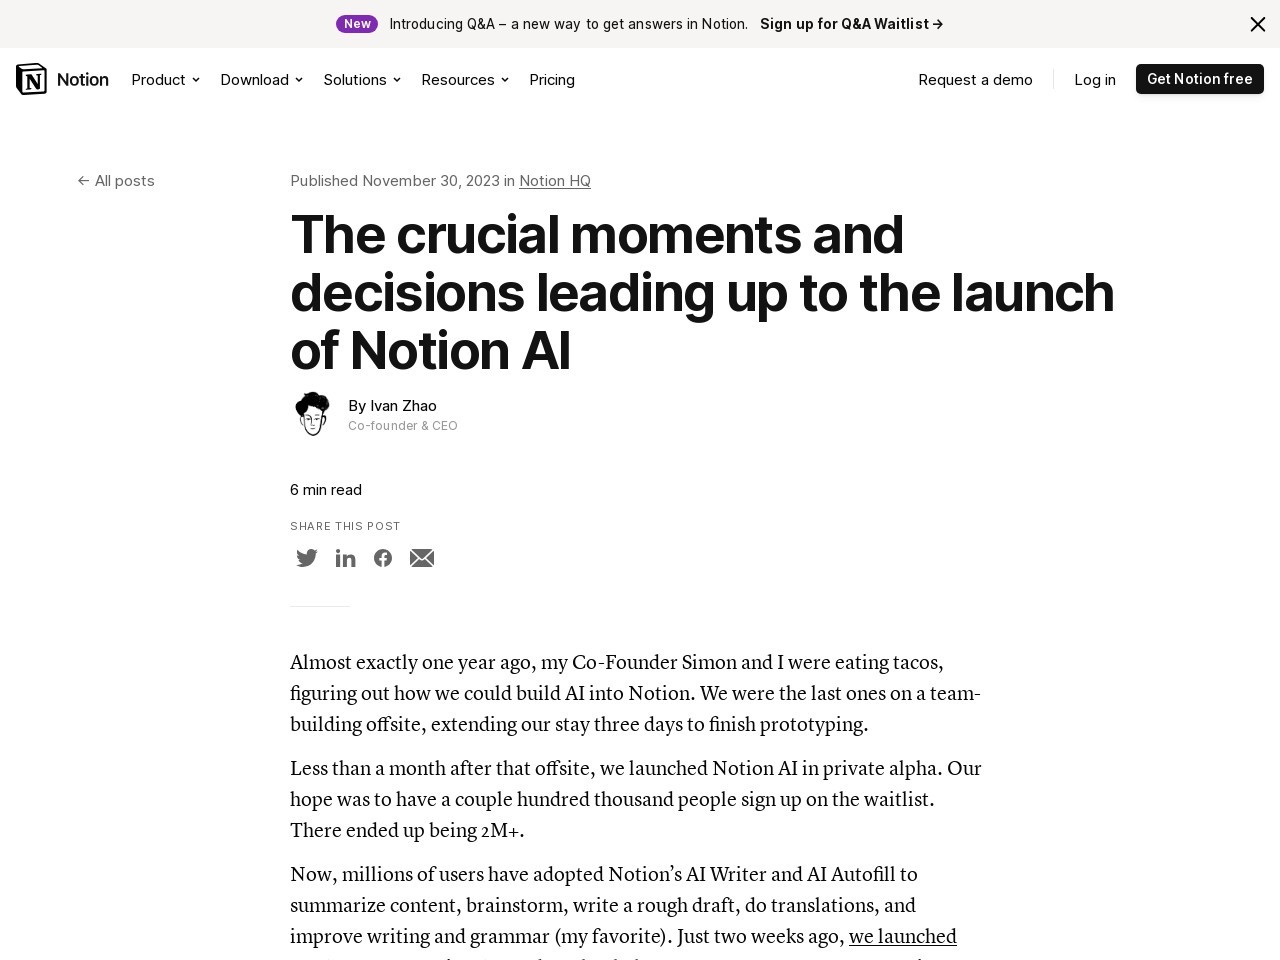 The crucial moments and decisions leading up to the launch of Notion AI